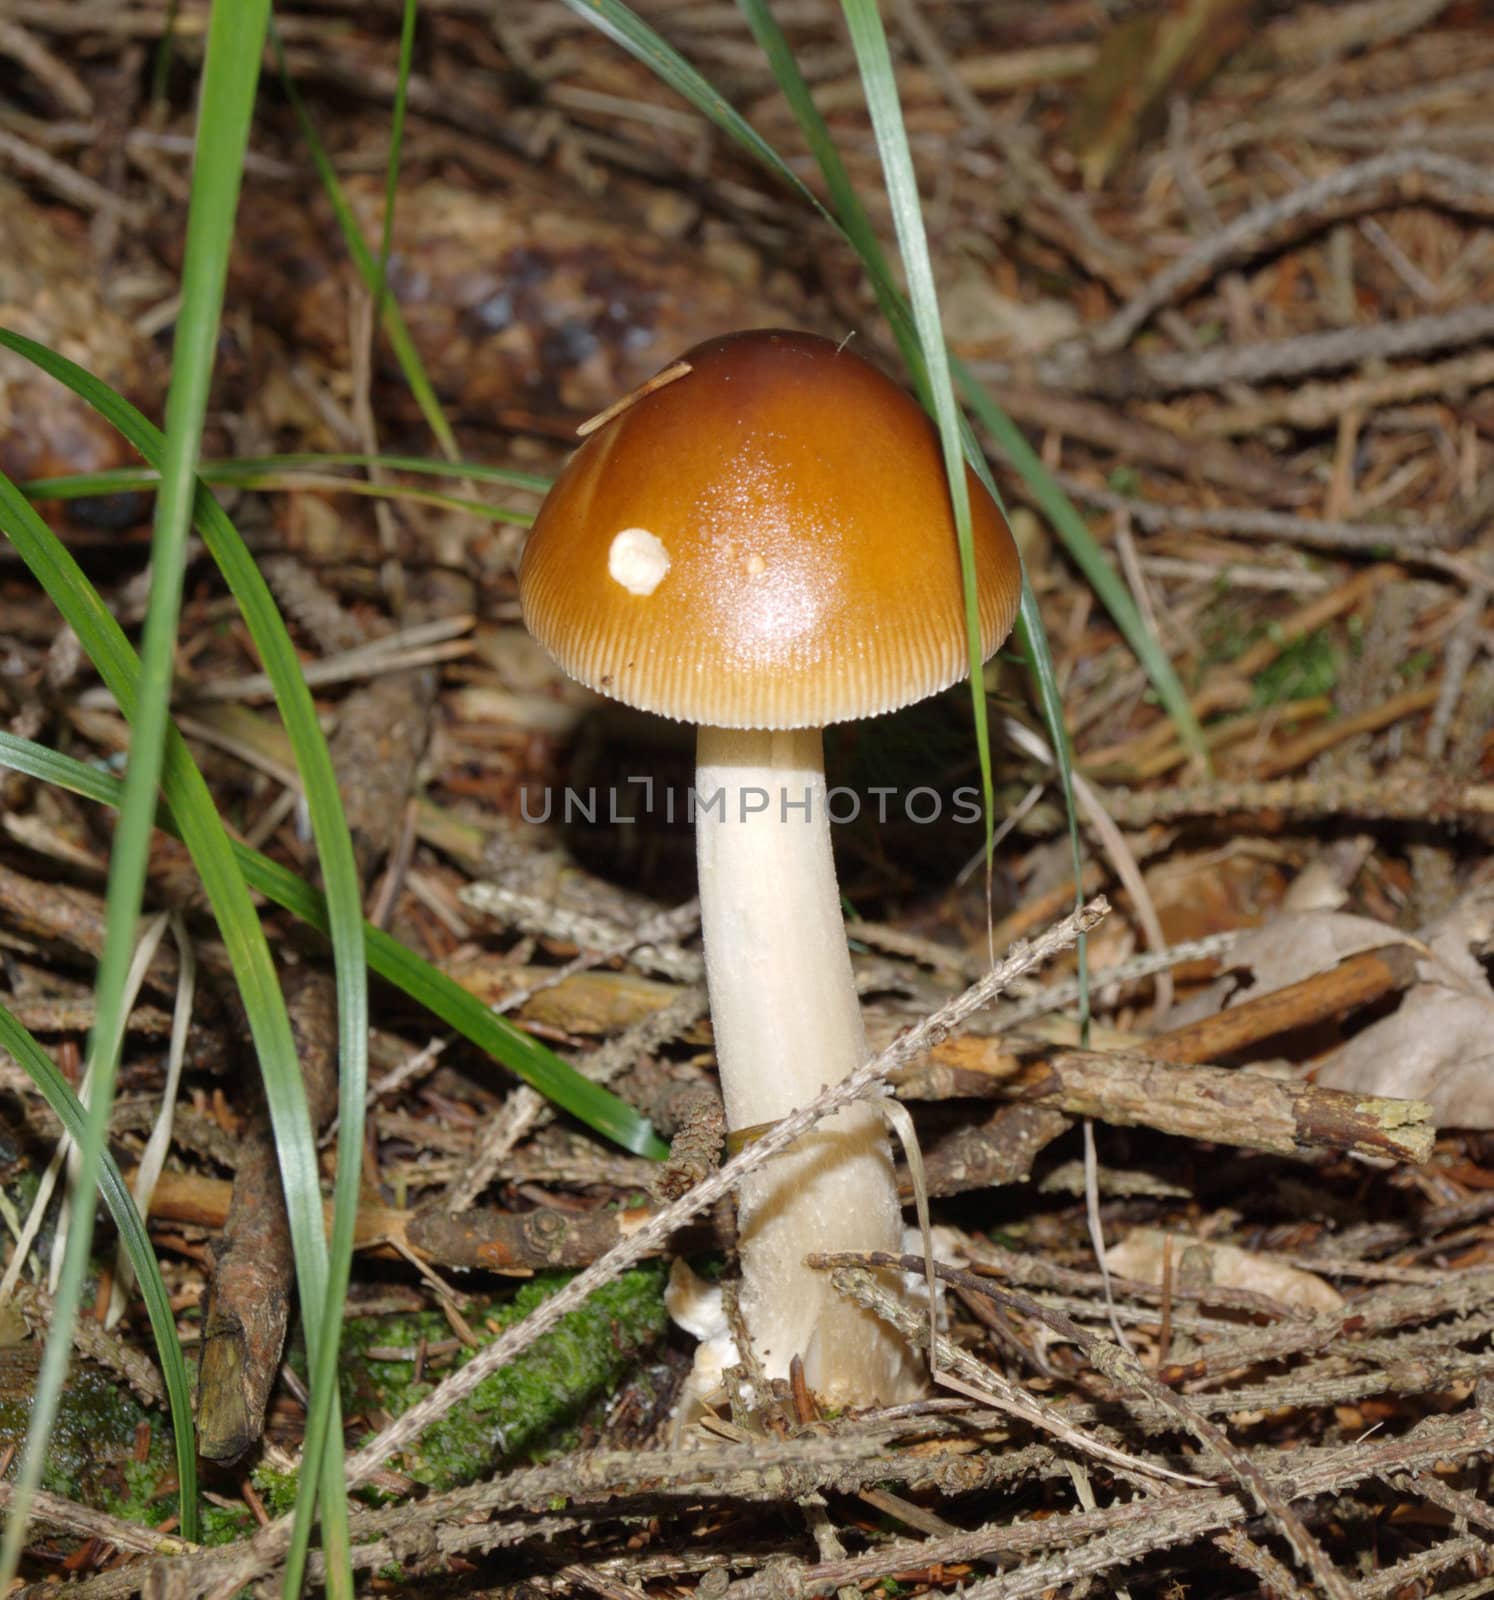 the nice mushroom wiht bright hat by renales